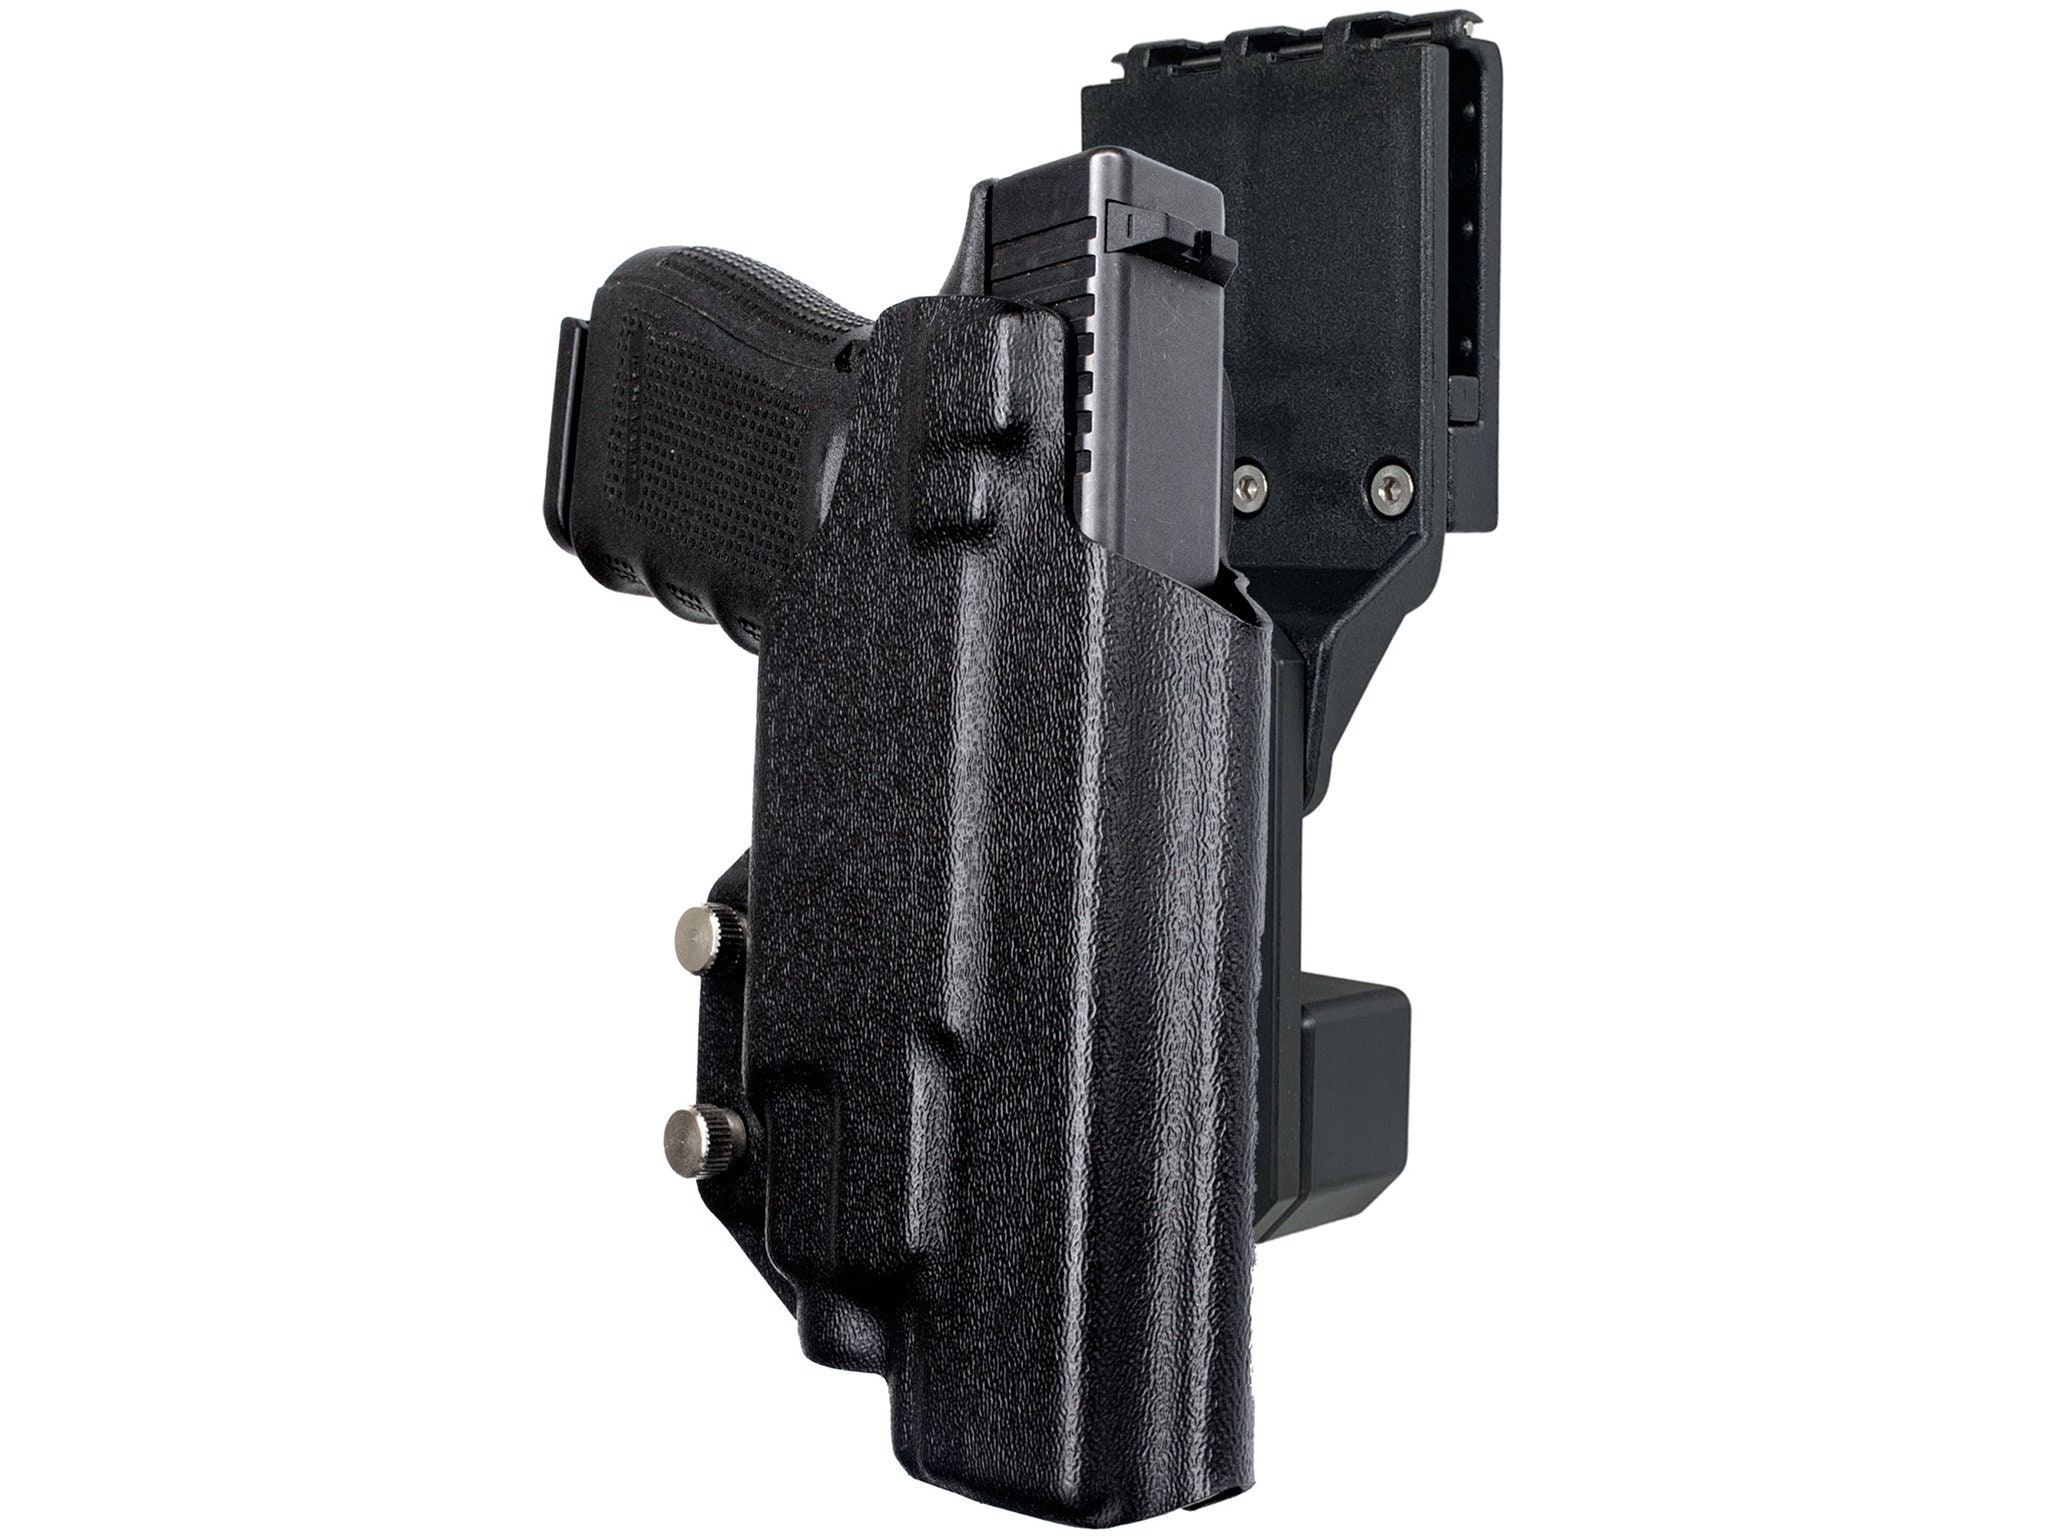 27+ Psa Dagger Compact Holster With Light